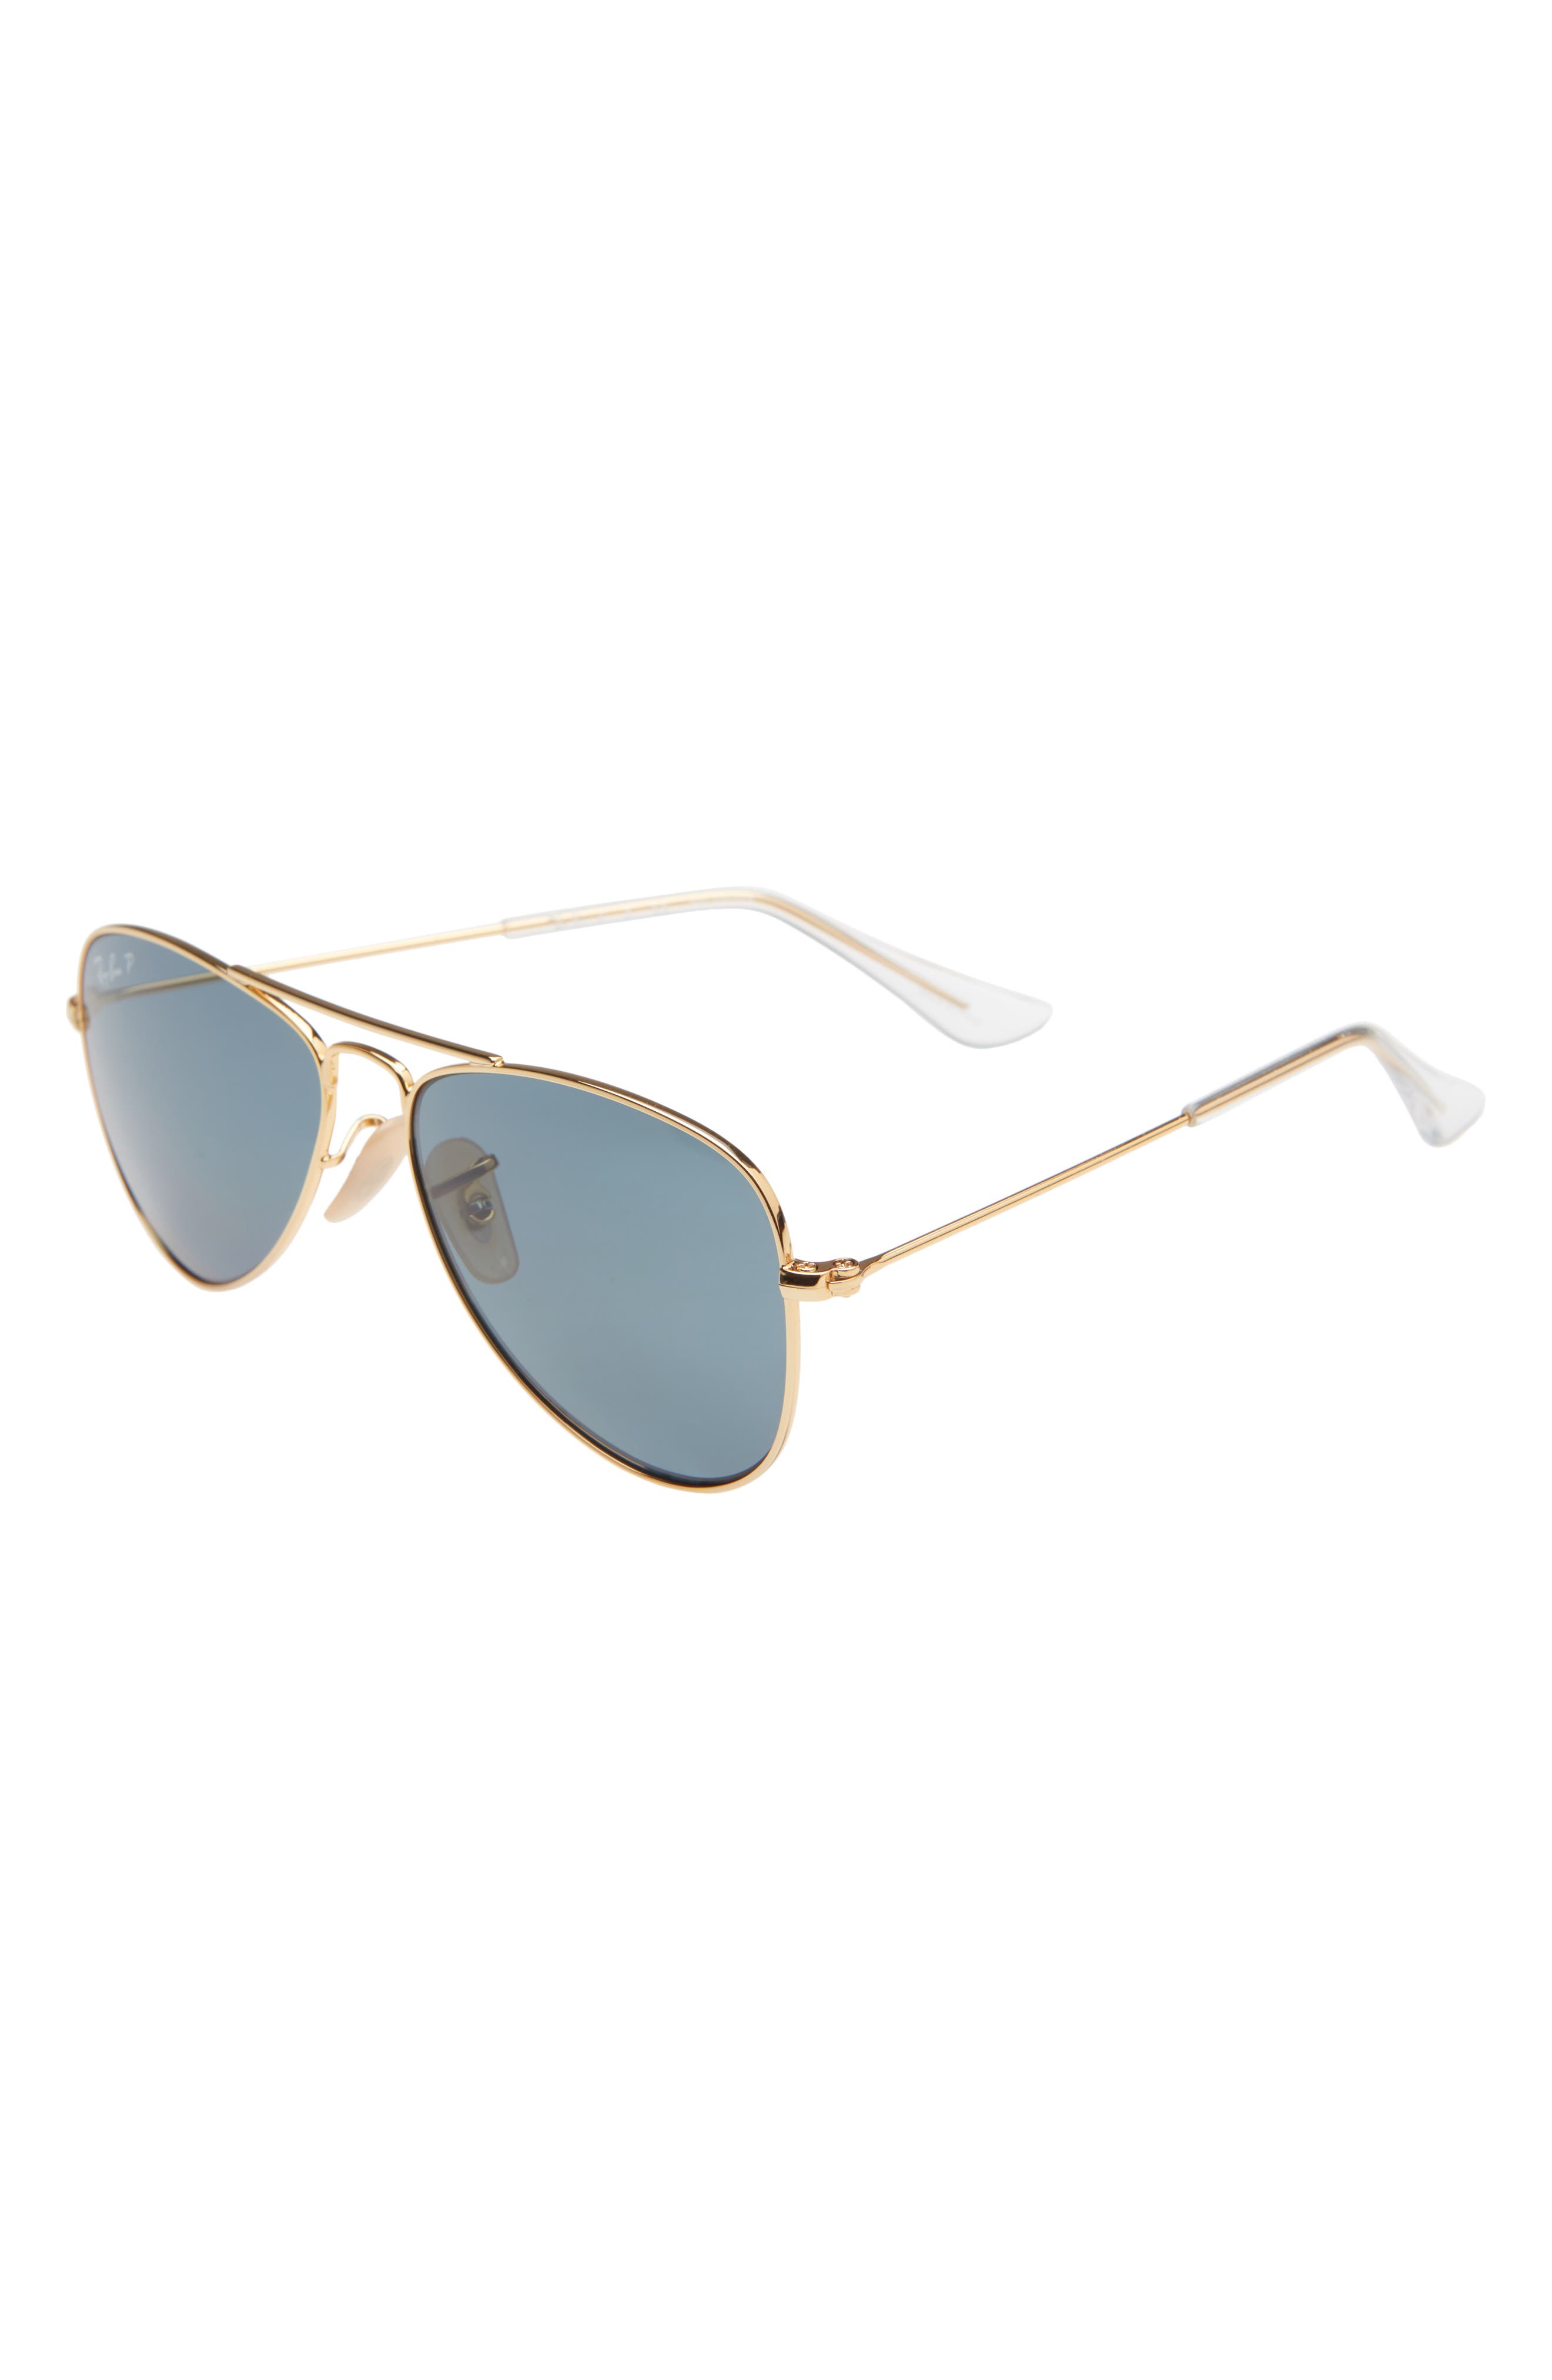 Shop Now For The Ray Ban Pilot 50mm Polarized Aviator Sunglasses Gold Dark Blue Polarized Accuweather Shop